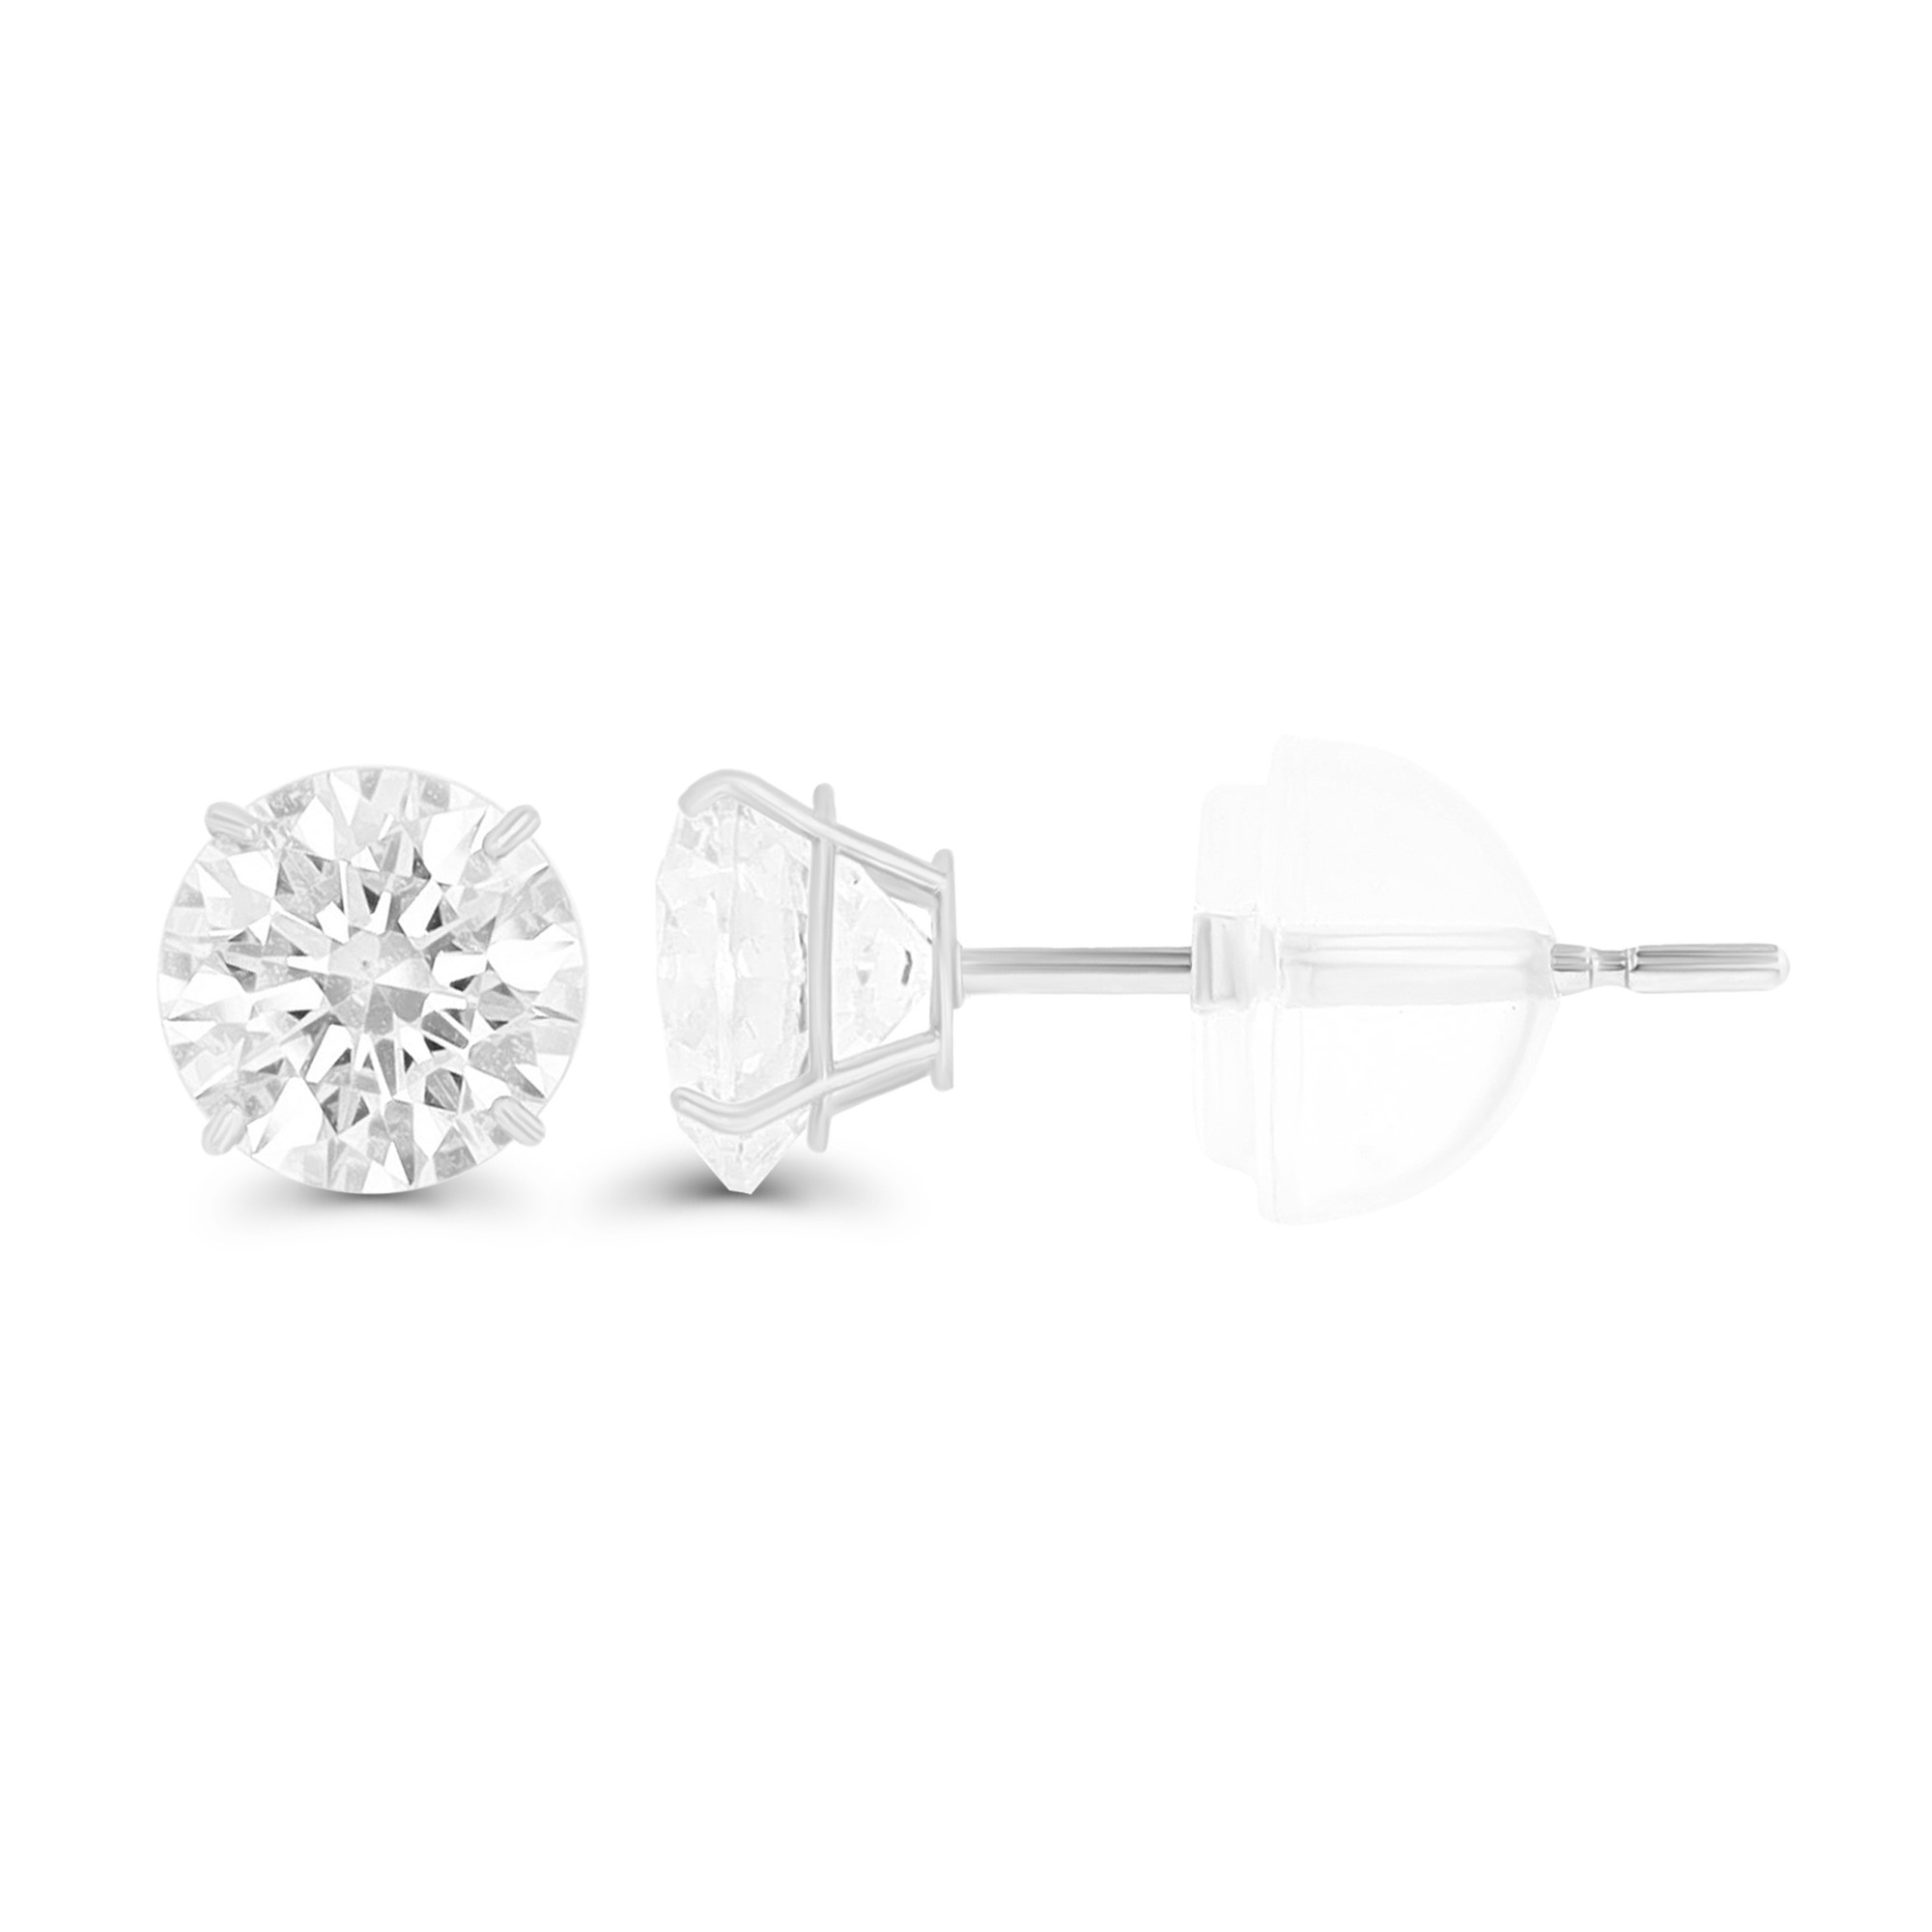 14K White Gold 4mm Rd White Swarovski Zirconia 4-Prong Cast Basket Solitaire Earring & Silicone Bubble Back